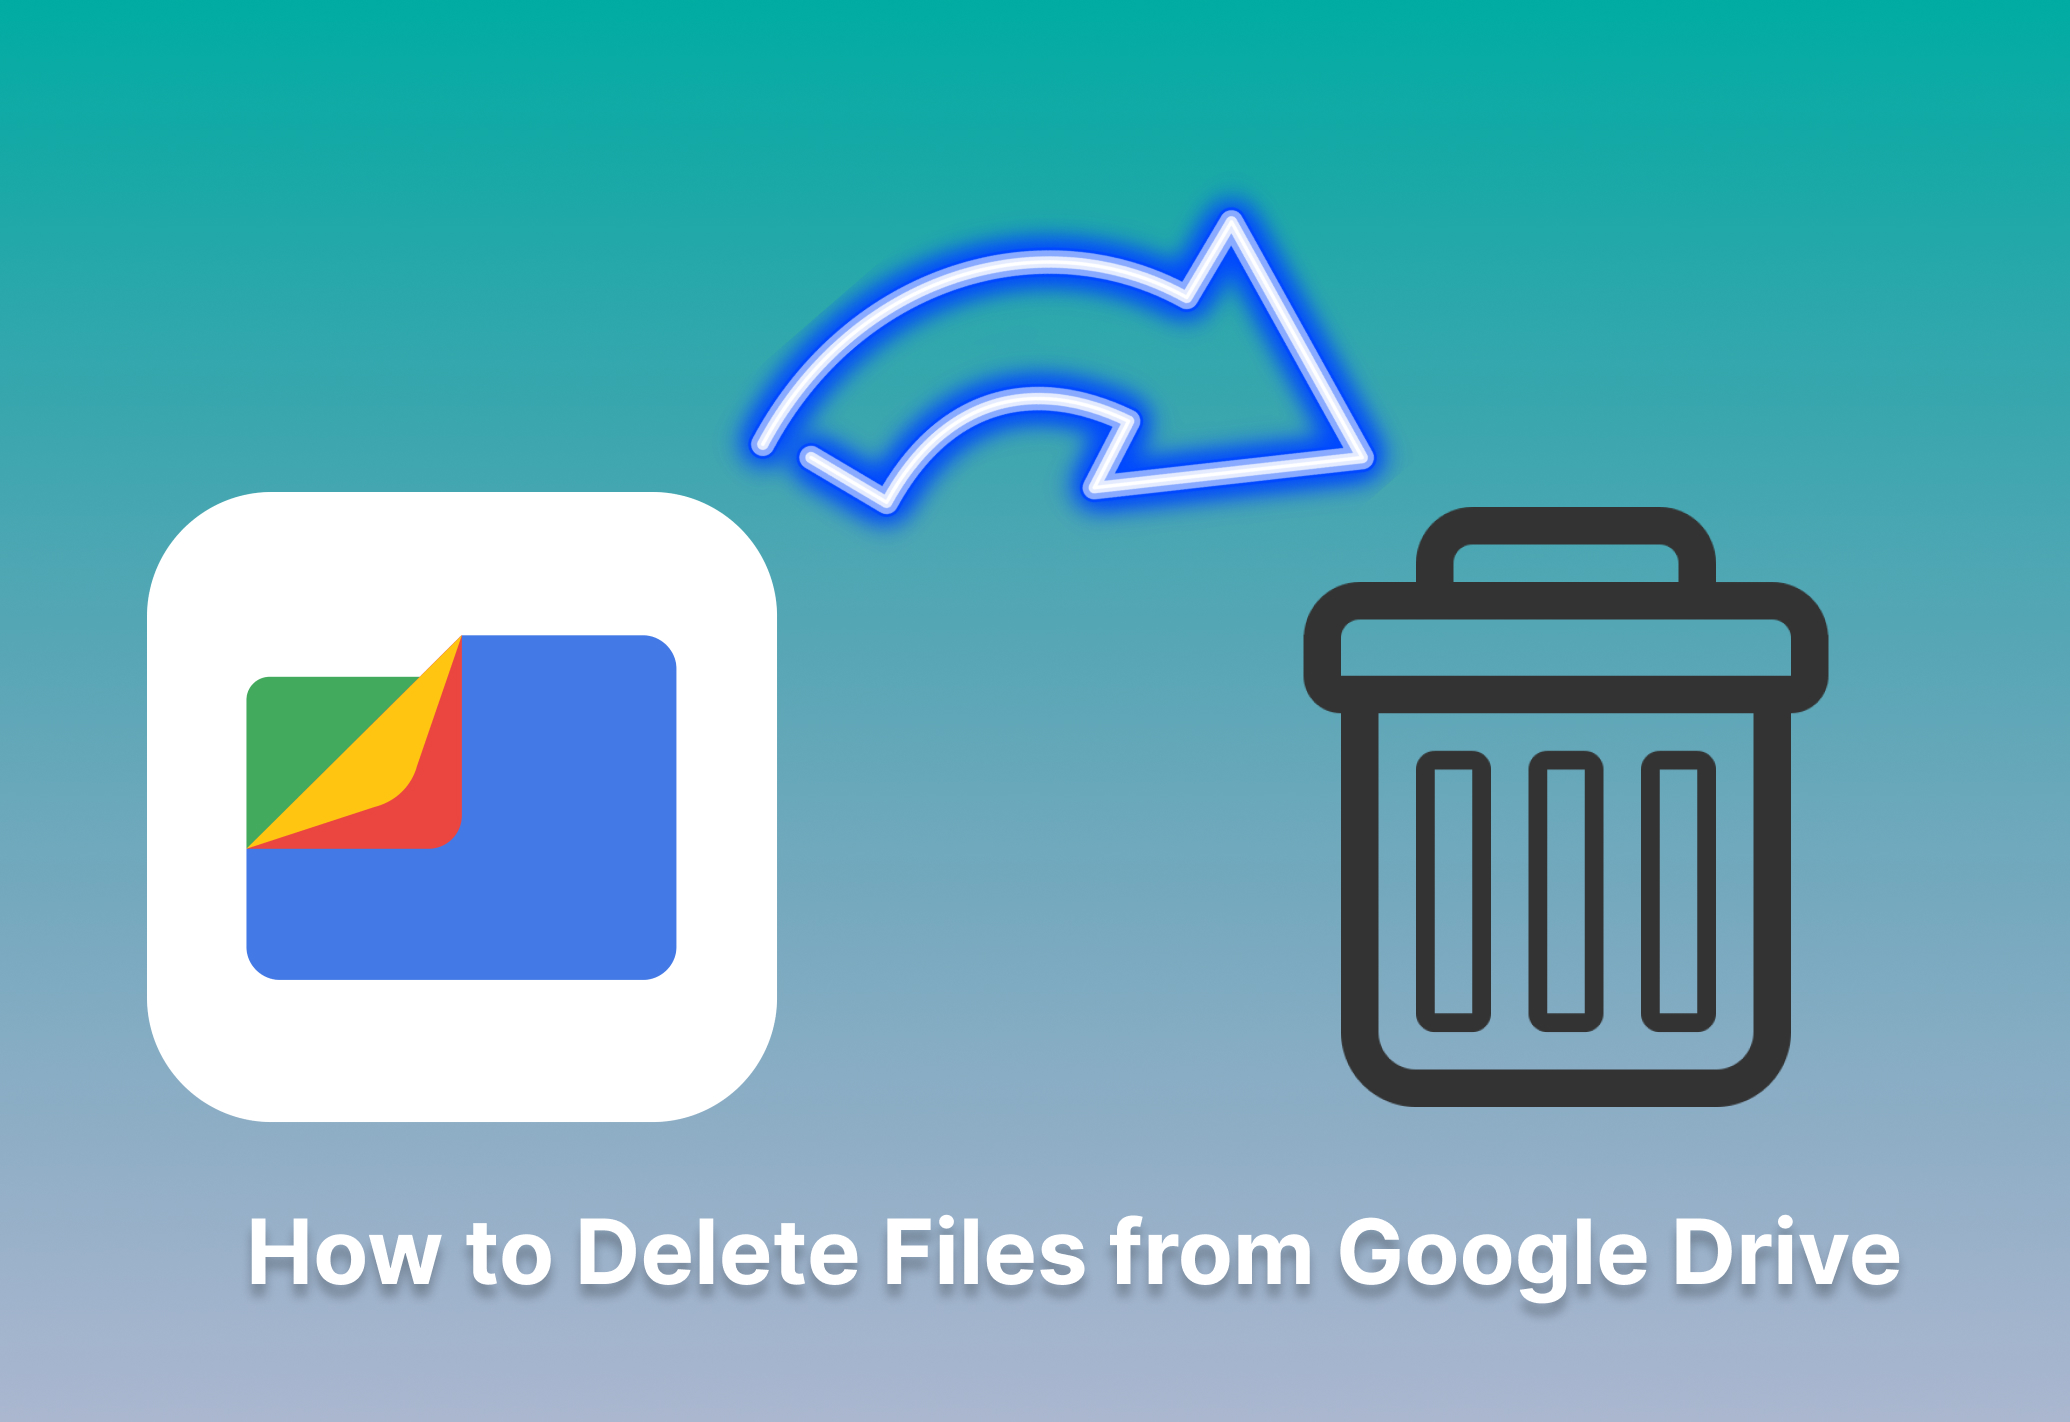 A Quick Guide on How to Delete Files from Google Drive